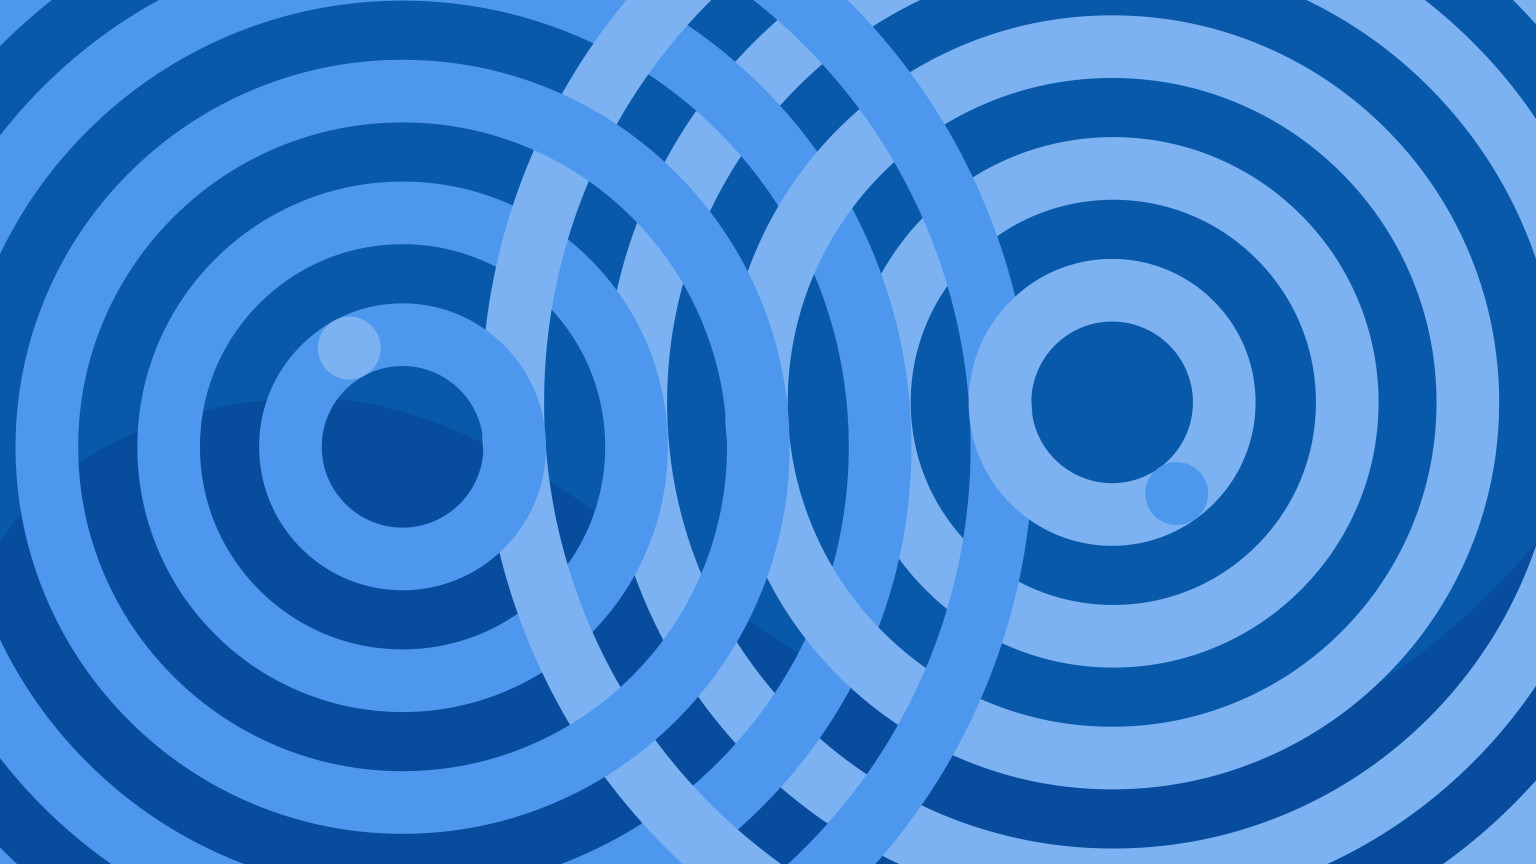 Illustration of two circular patterns, representing research centrailzied on users.